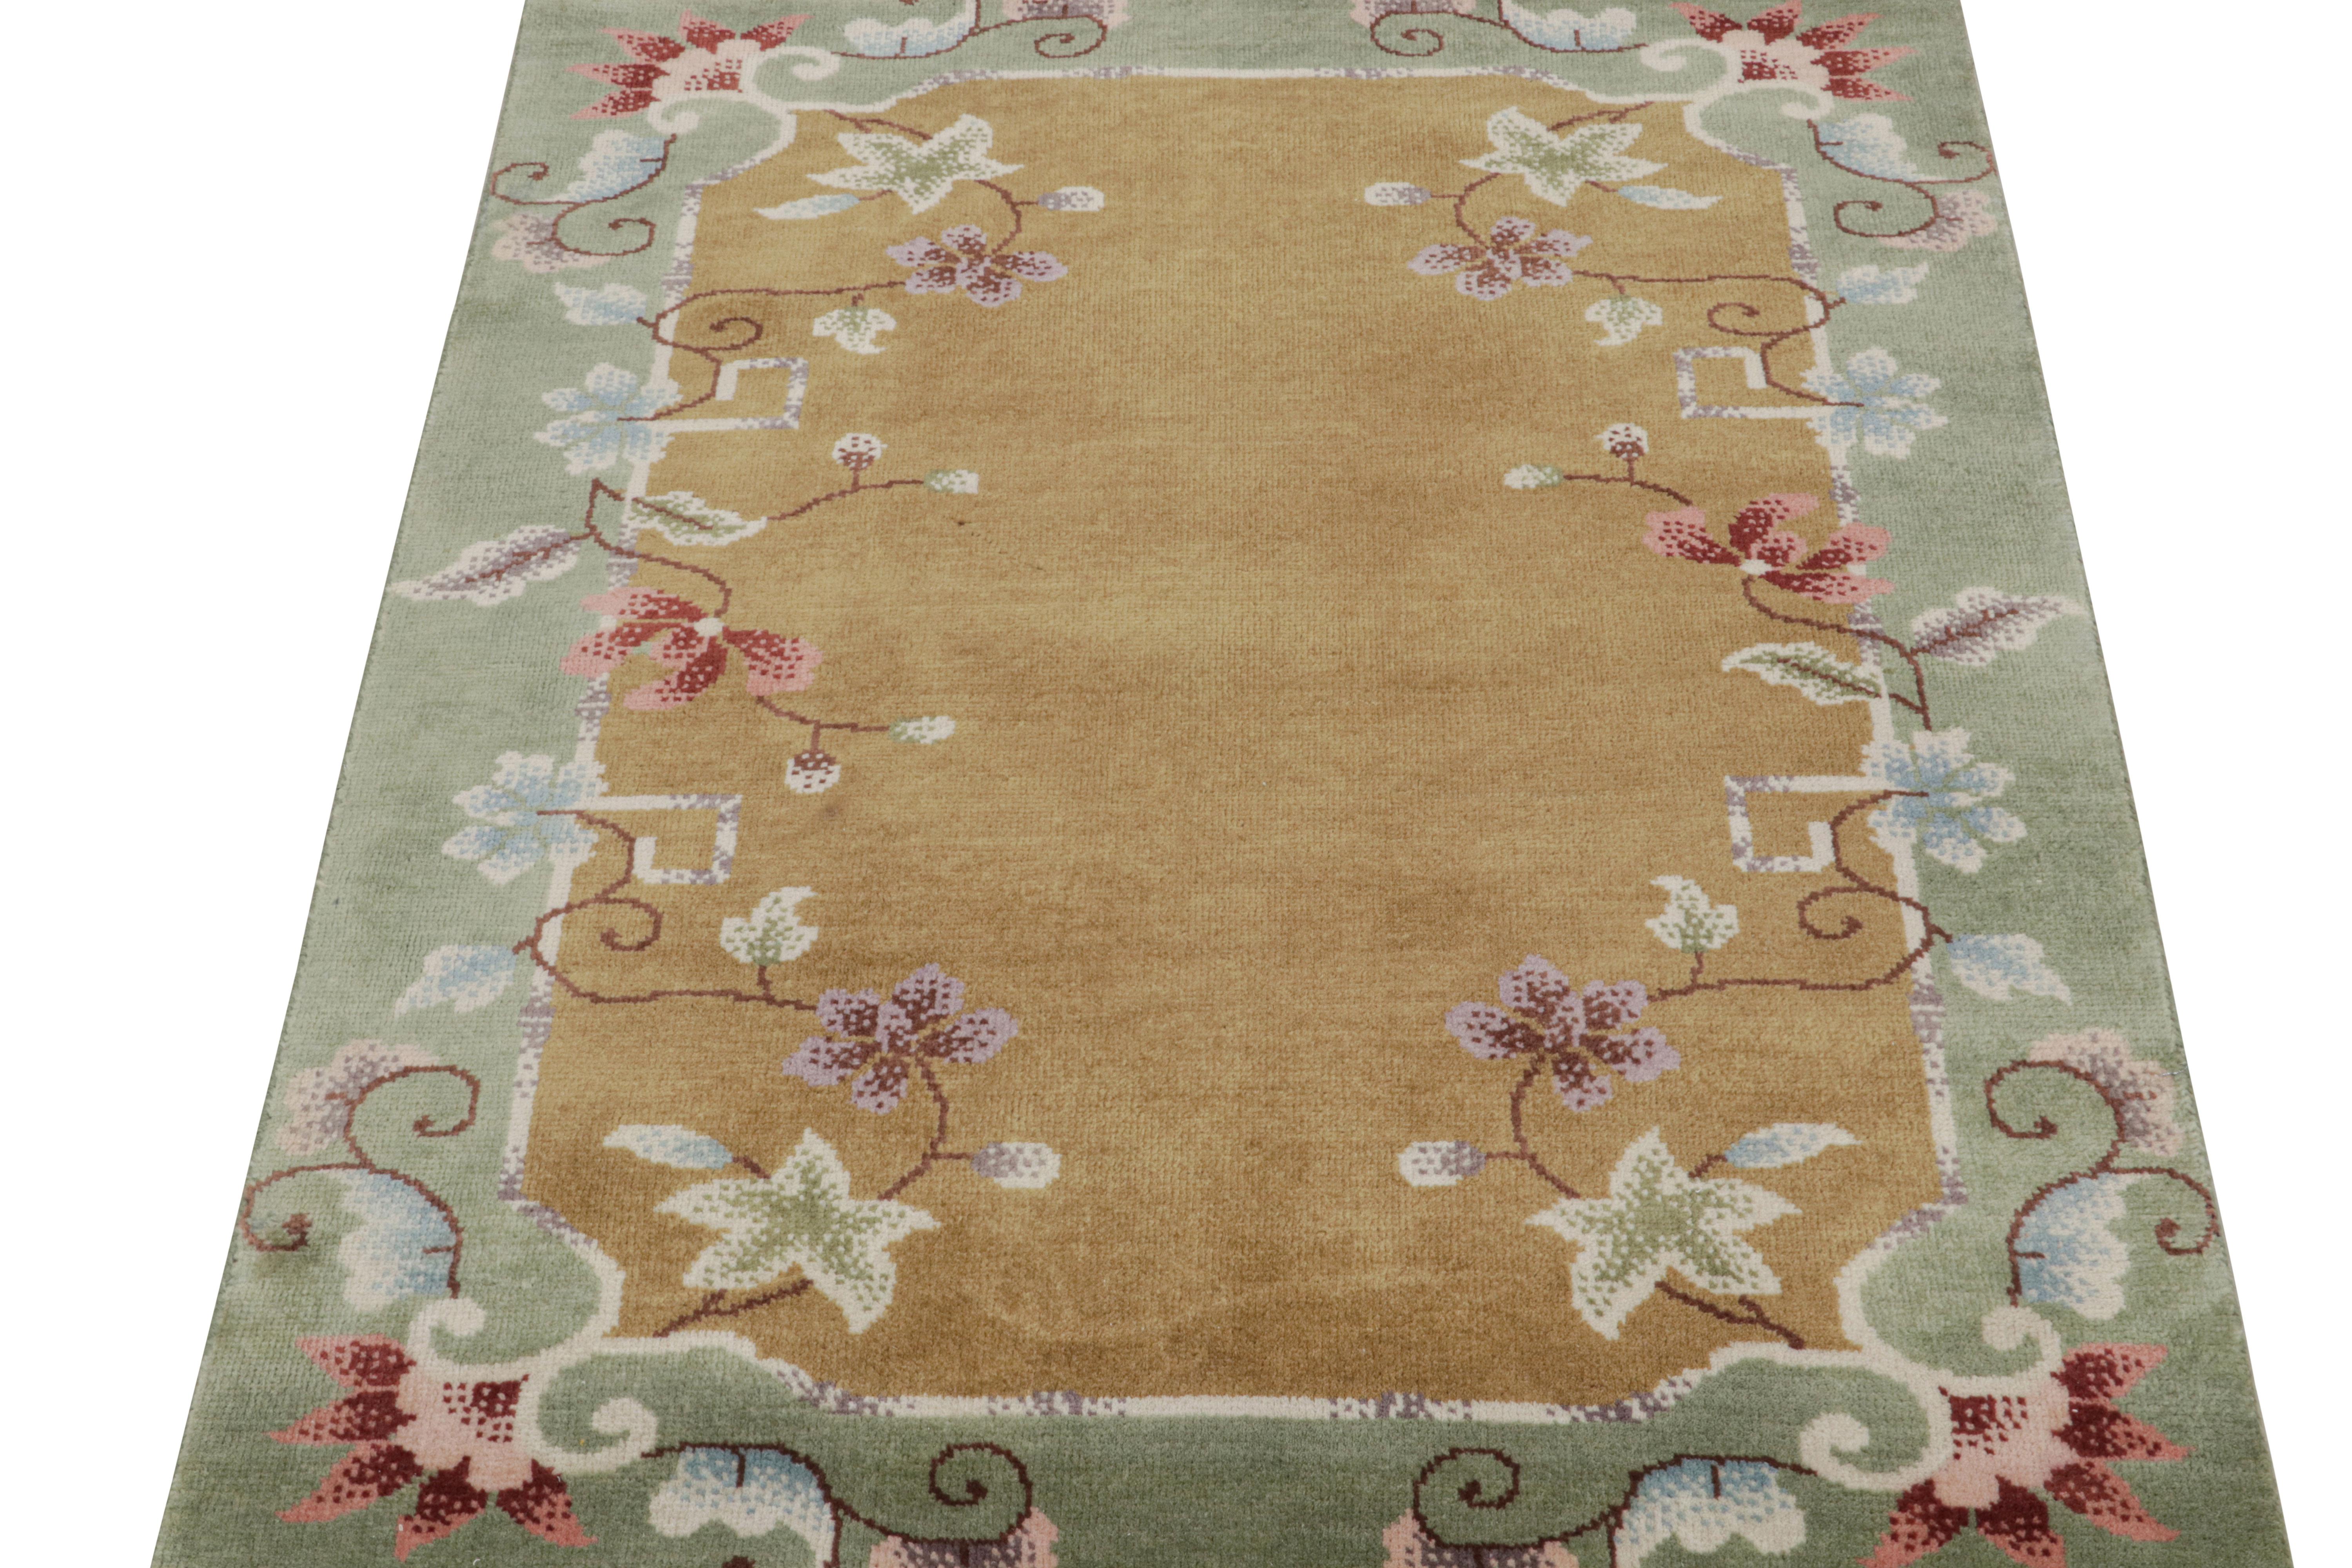 Modern Rug & Kilim’s Chinese Art Deco Style Rug In Brown with Colorful Floral Patterns For Sale